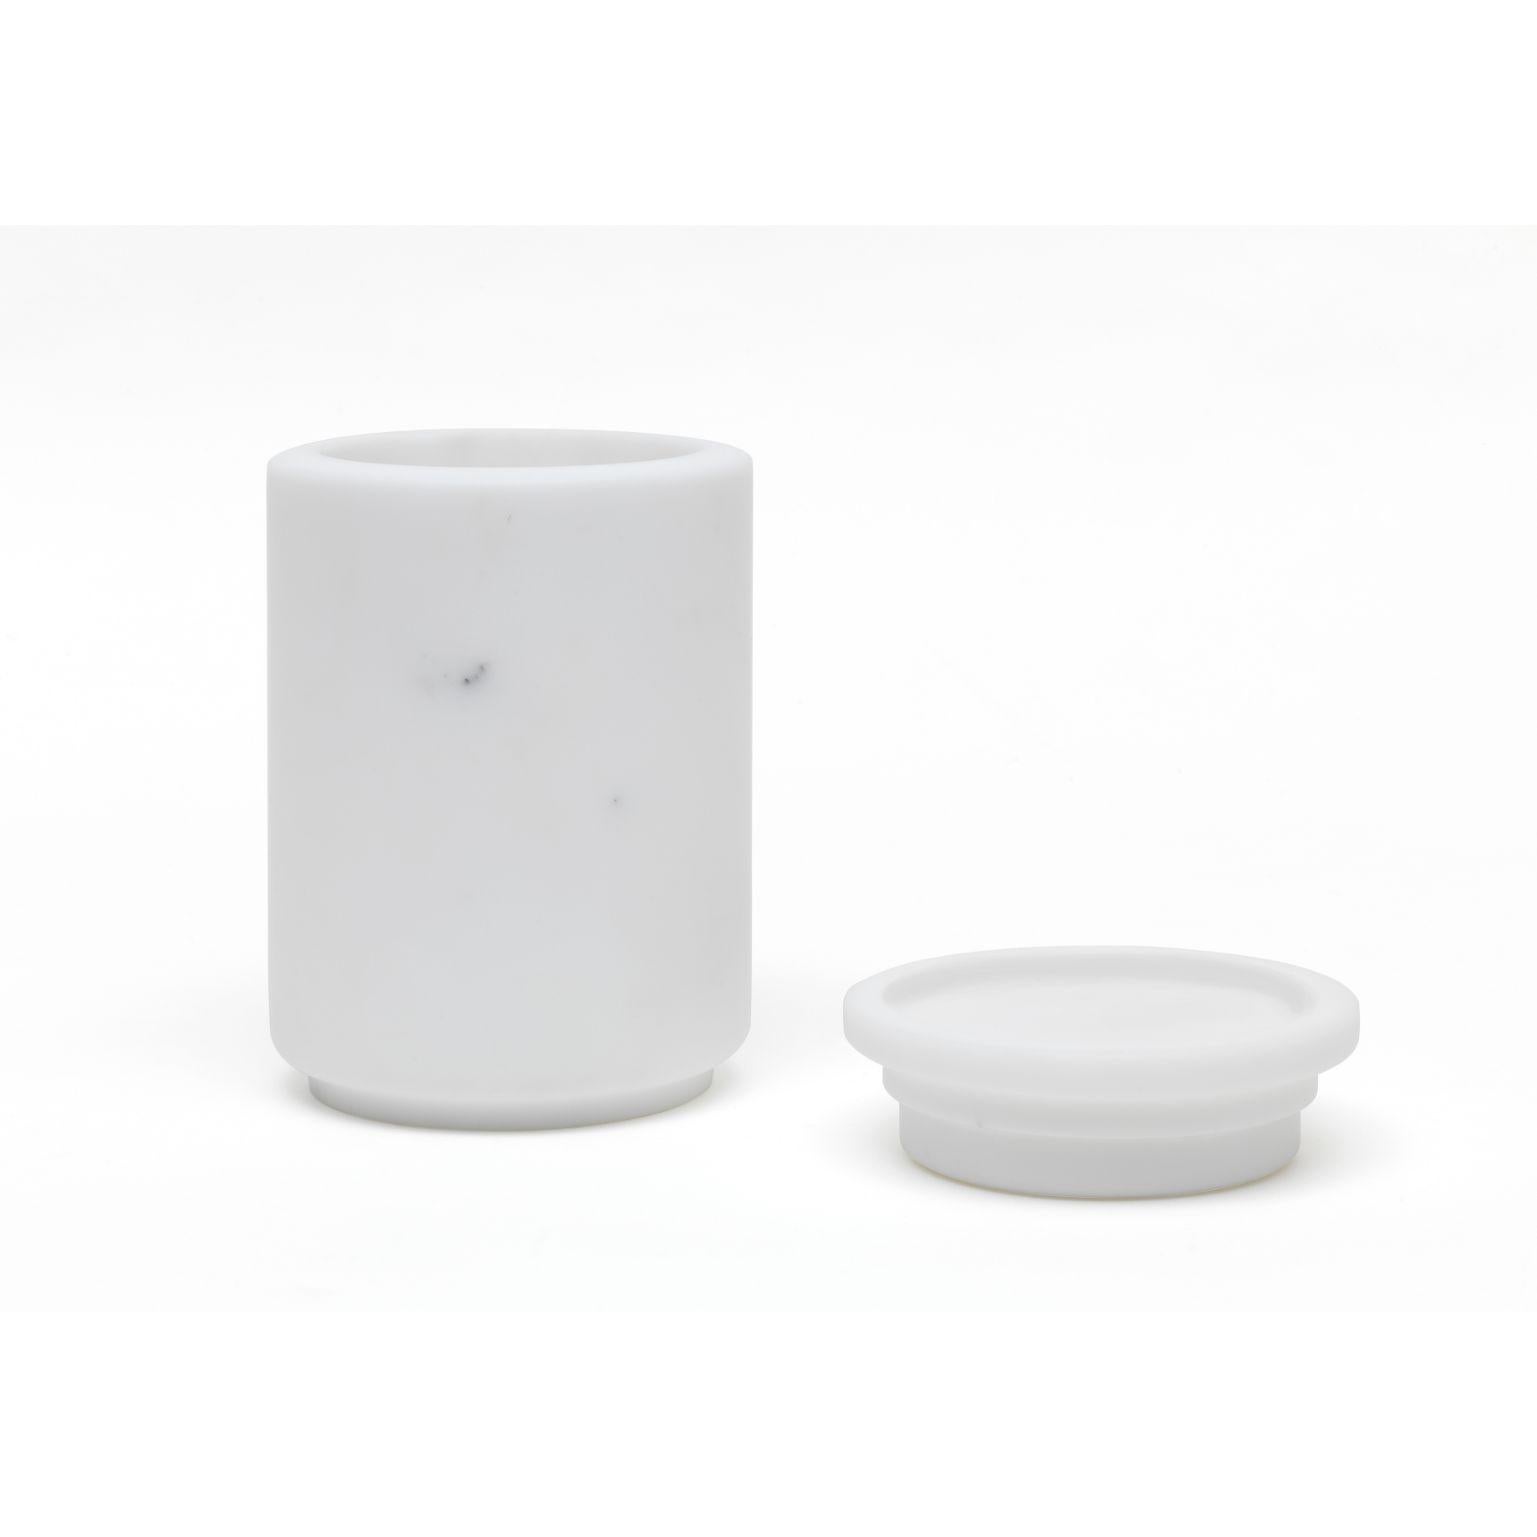 Pyxis - Large pot - White by Ivan Colominas
Pyxis Collection
Dimensions: 12.6 x 19 cm
Materials: Bianco michelangelo

Also available: Nero marquinia, small & medium

A refined collection articulated through cylinders that vary only in size